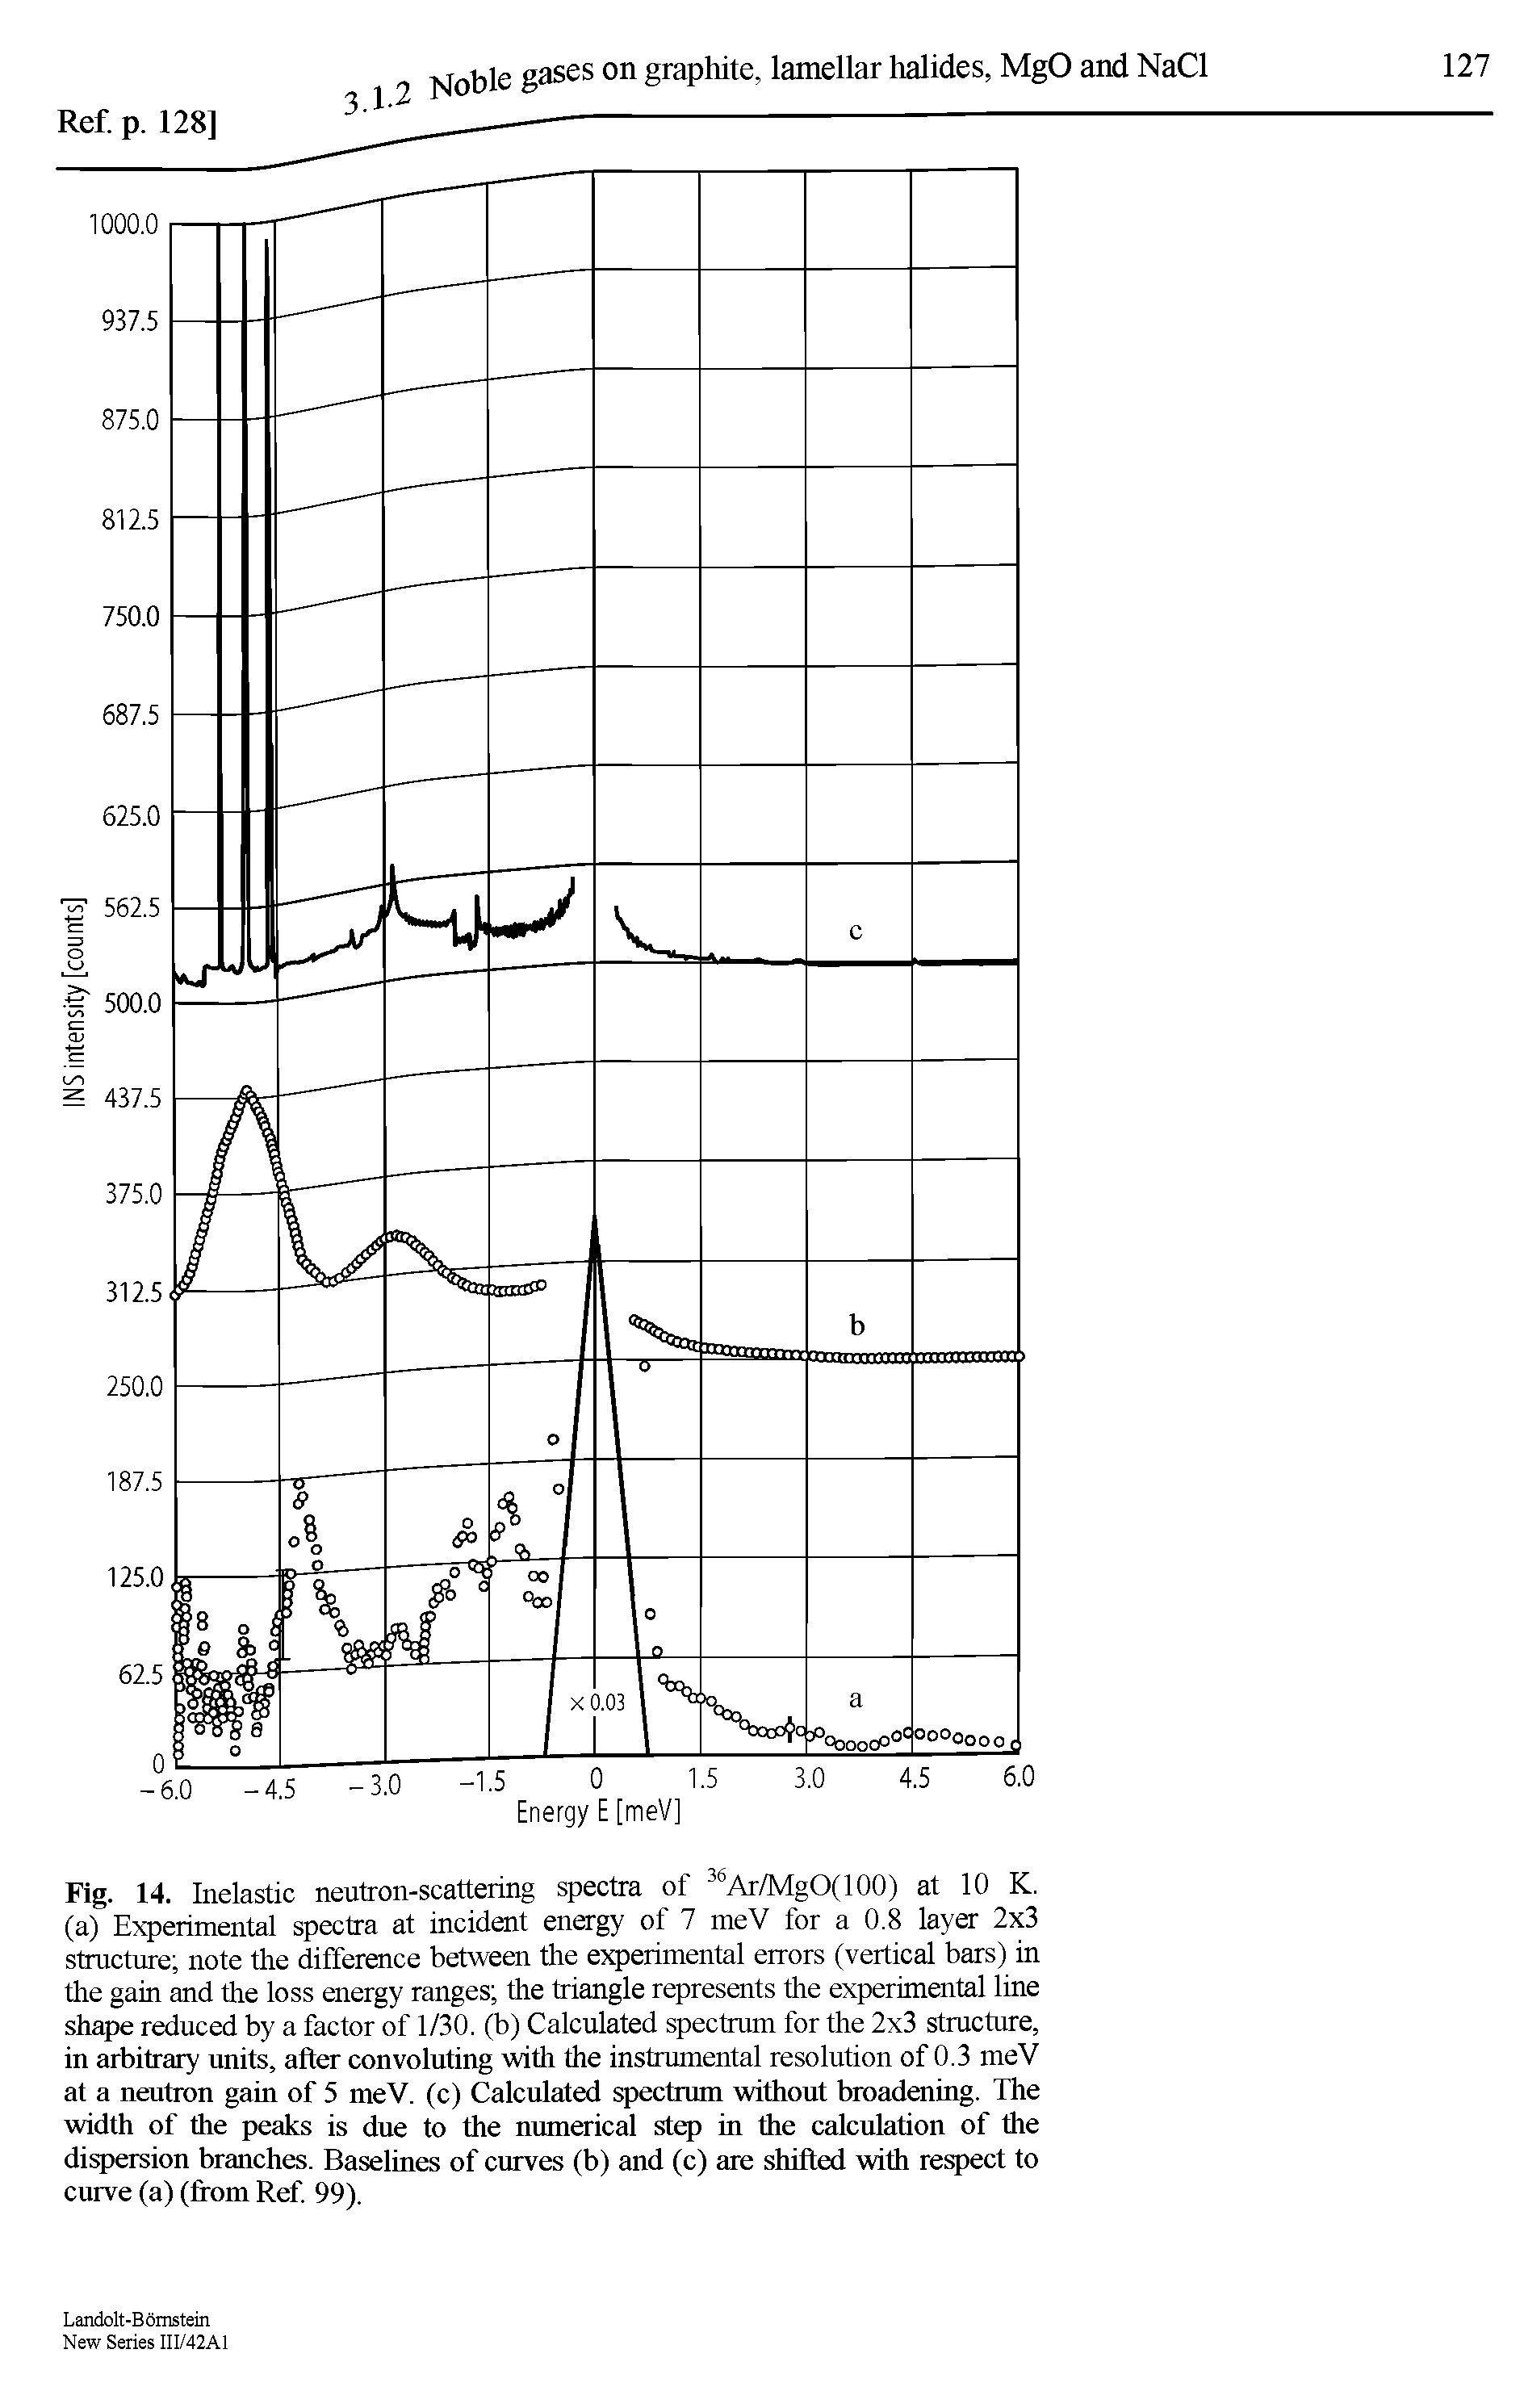 Fig. 14. Inelastic neutron-scattering spectra of Ar/MgO(100) at 10 K. (a) Experimental spectra at incident energy of 7 meV for a 0.8 layer 2x3 structure note the difference between the experimental errors (vertical bars) in the gain and the loss energy ranges the triangle represents the experimental line shape reduced by a factor of 1/30. (b) Calculated spectrum for the 2x3 structure, in arbitrary units, after convoluting with the instrumental resolution of 0.3 meV at a neutron gain of 5 meV. (c) Calculated spectrum without broadening. The width of the peaks is due to the numerical step in the calculation of the dispersion branches. Baselines of curves (b) and (c) are shifted with respect to curve (a) (fi-om Ref 99).